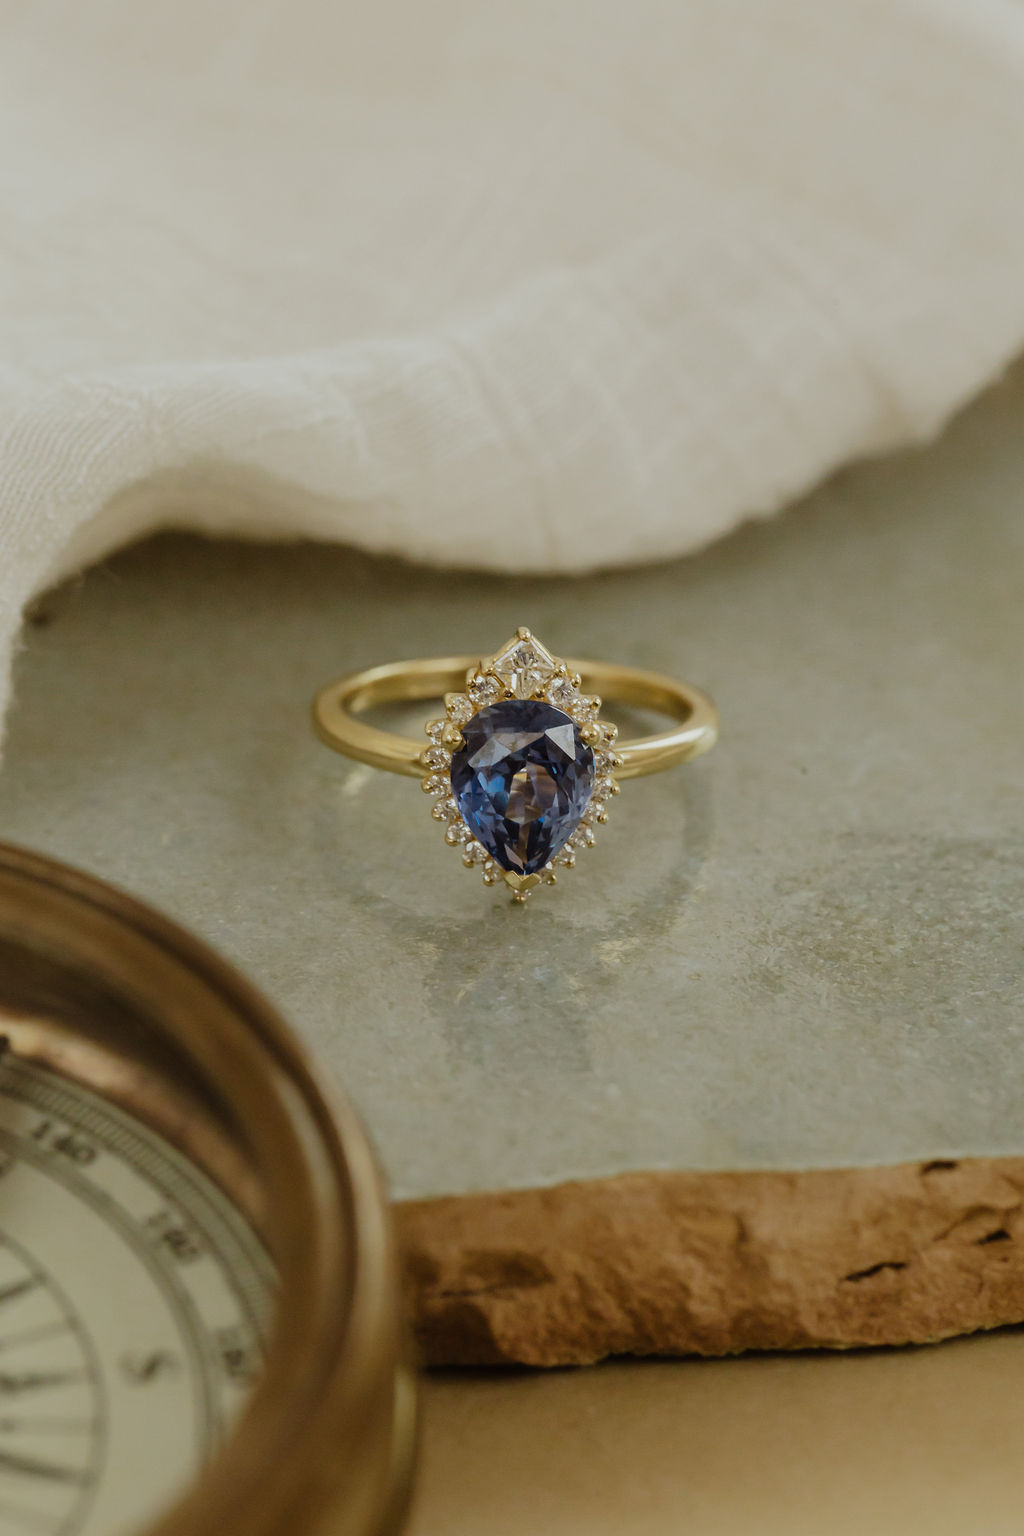 Gorgeous Teal Blue Sapphire Engagement Ring 14K White Gold